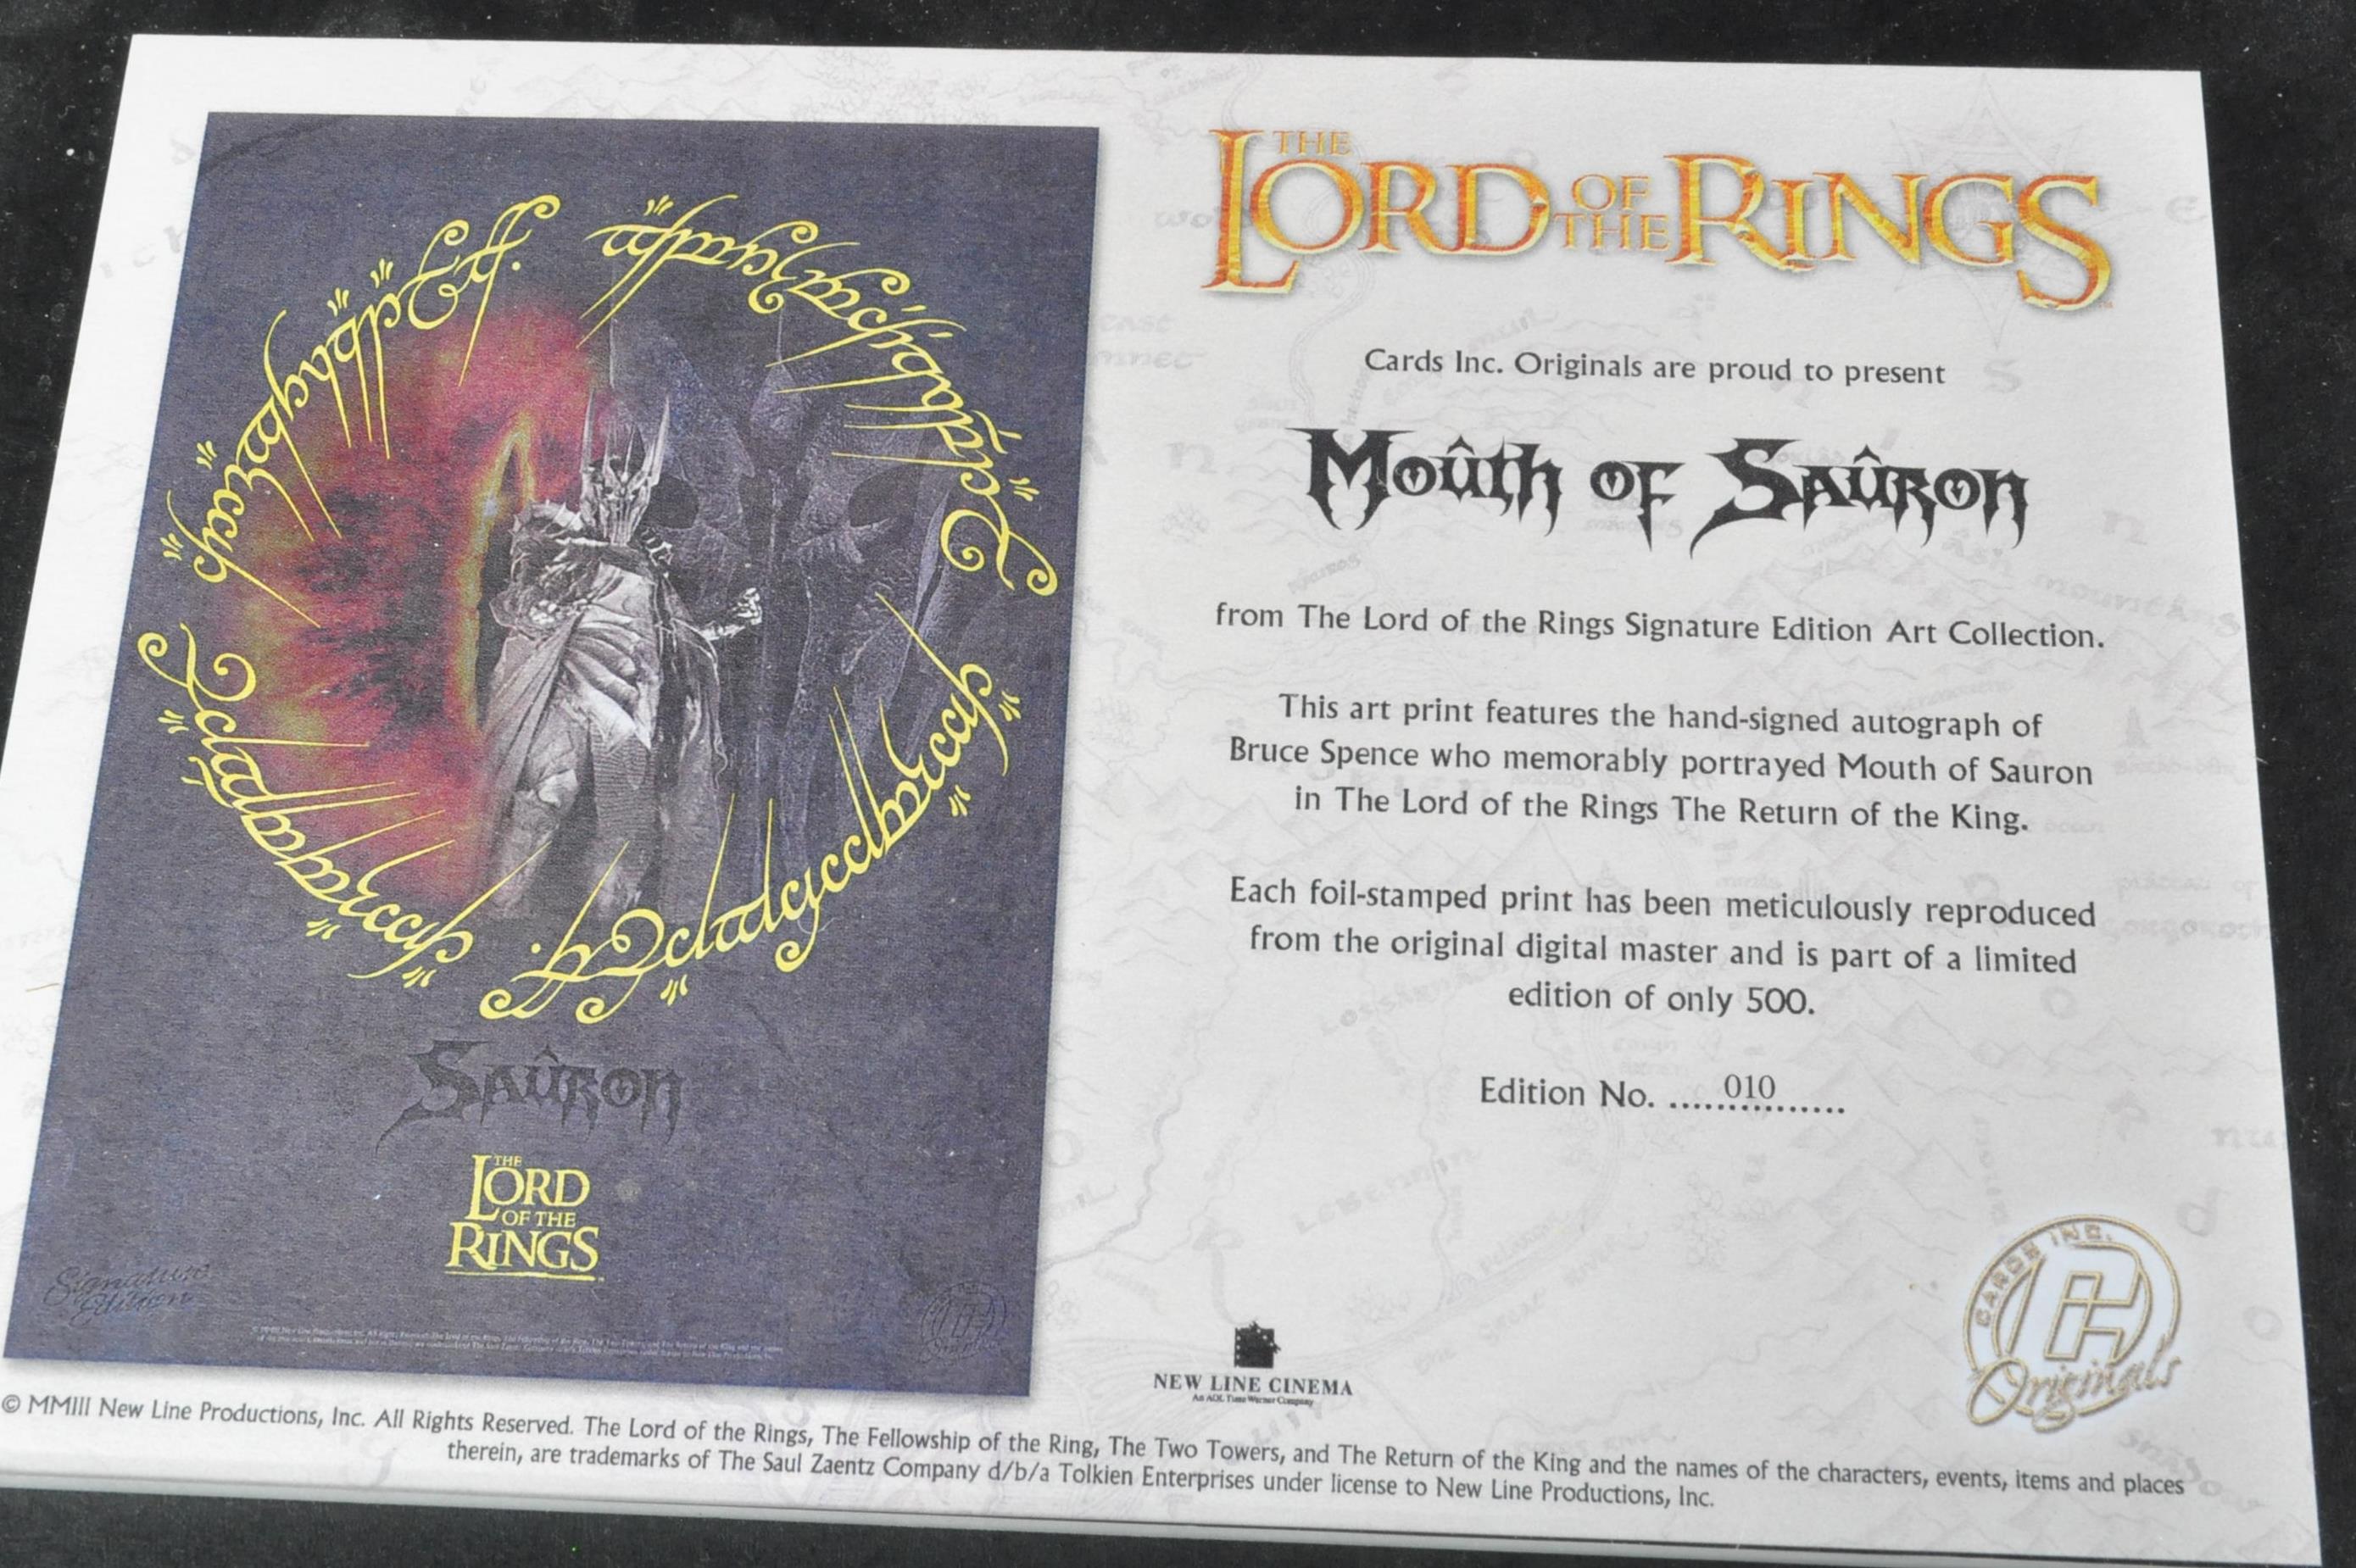 LORD OF THE RINGS - BRUCE SPENCE SIGNED LITHOGRAPHIC ART PRINT - Image 3 of 5